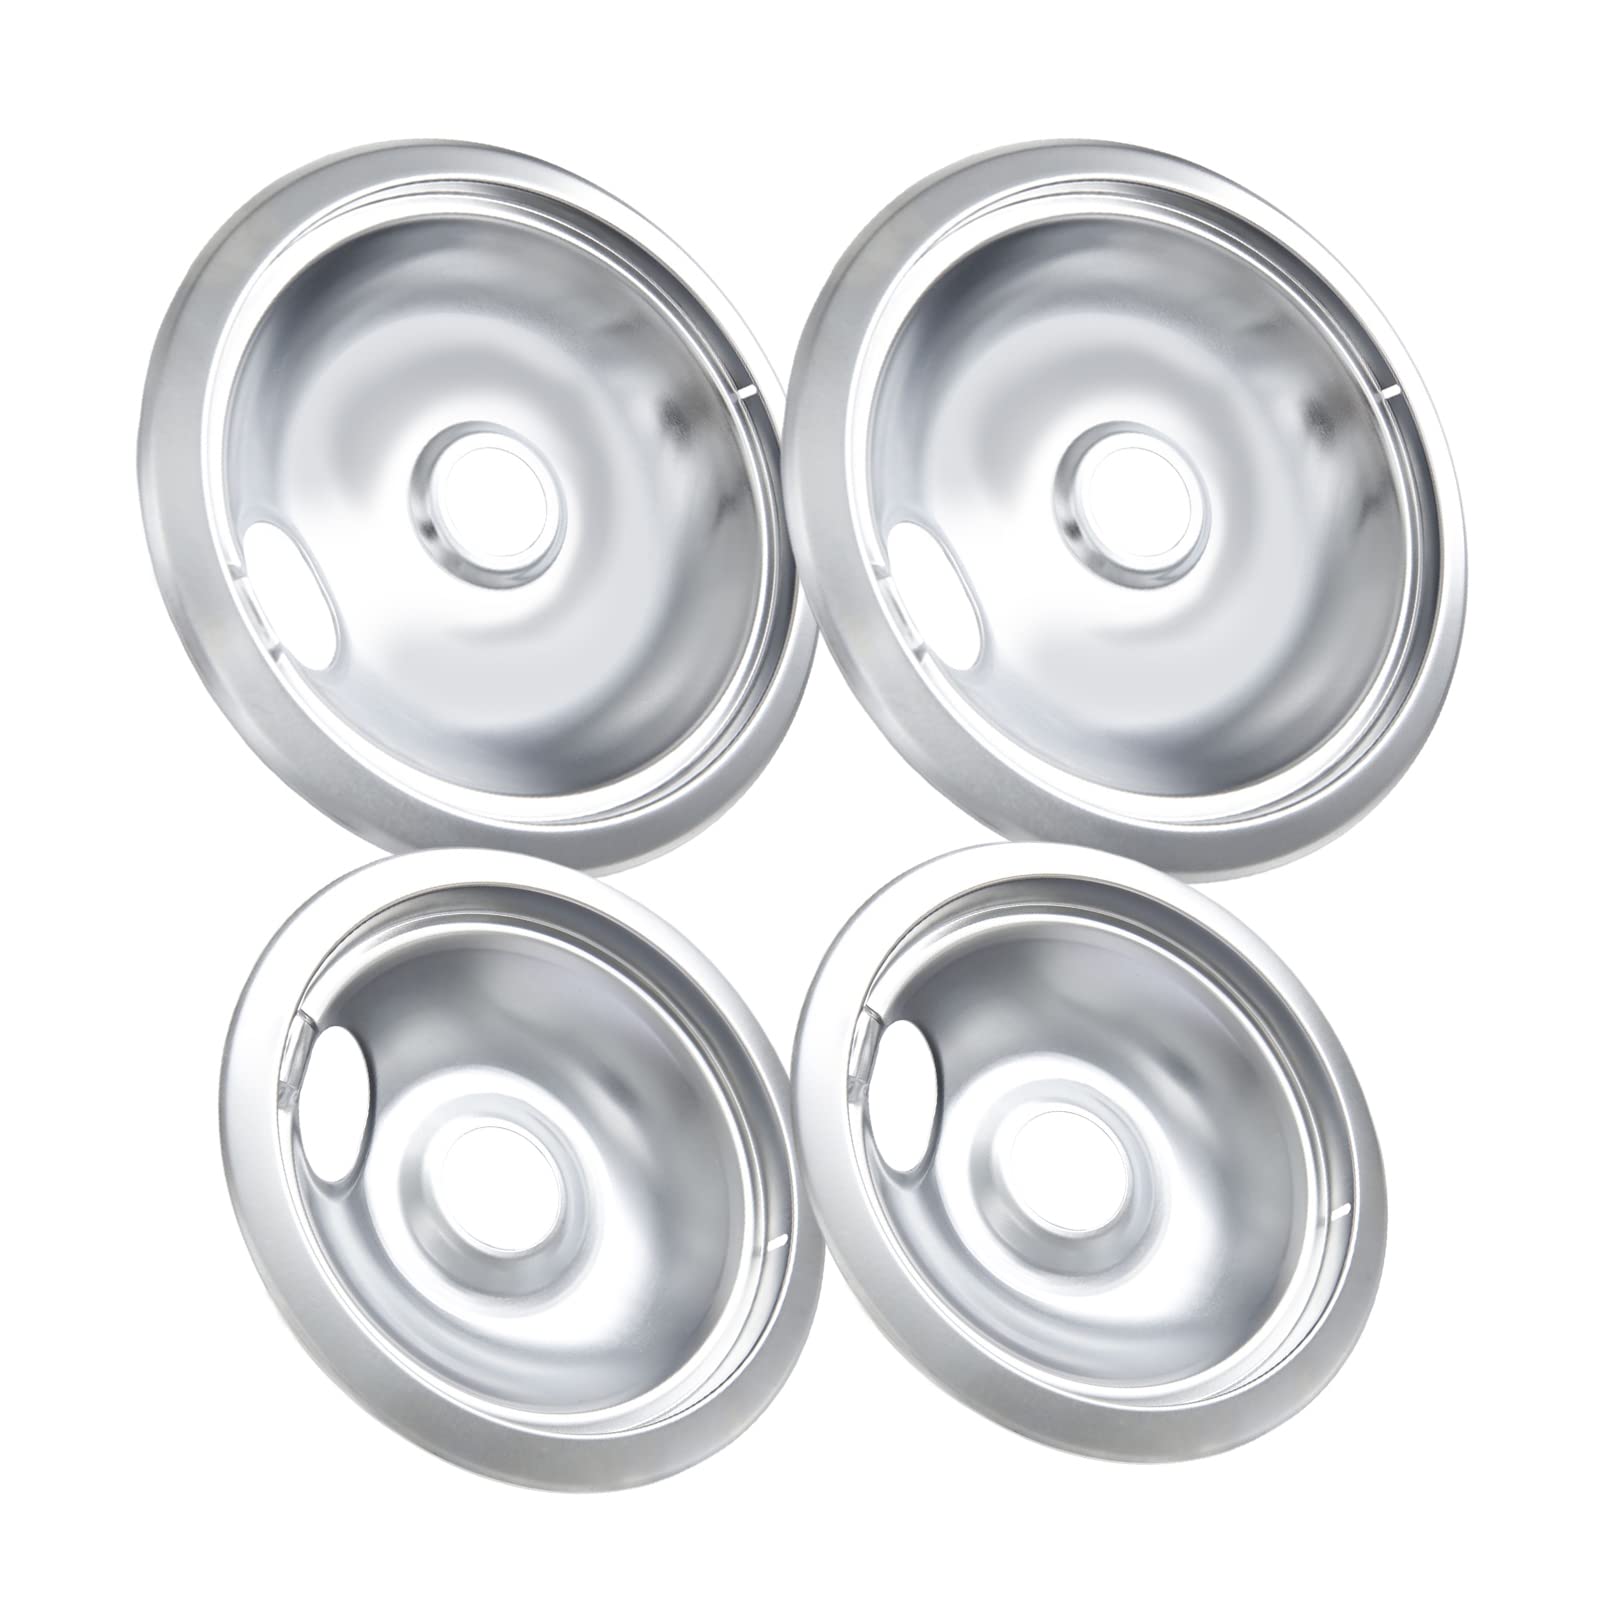 COZZIVITA 316048413 and 316048414 Stove Burner Drip Pans for Electric Stove Top